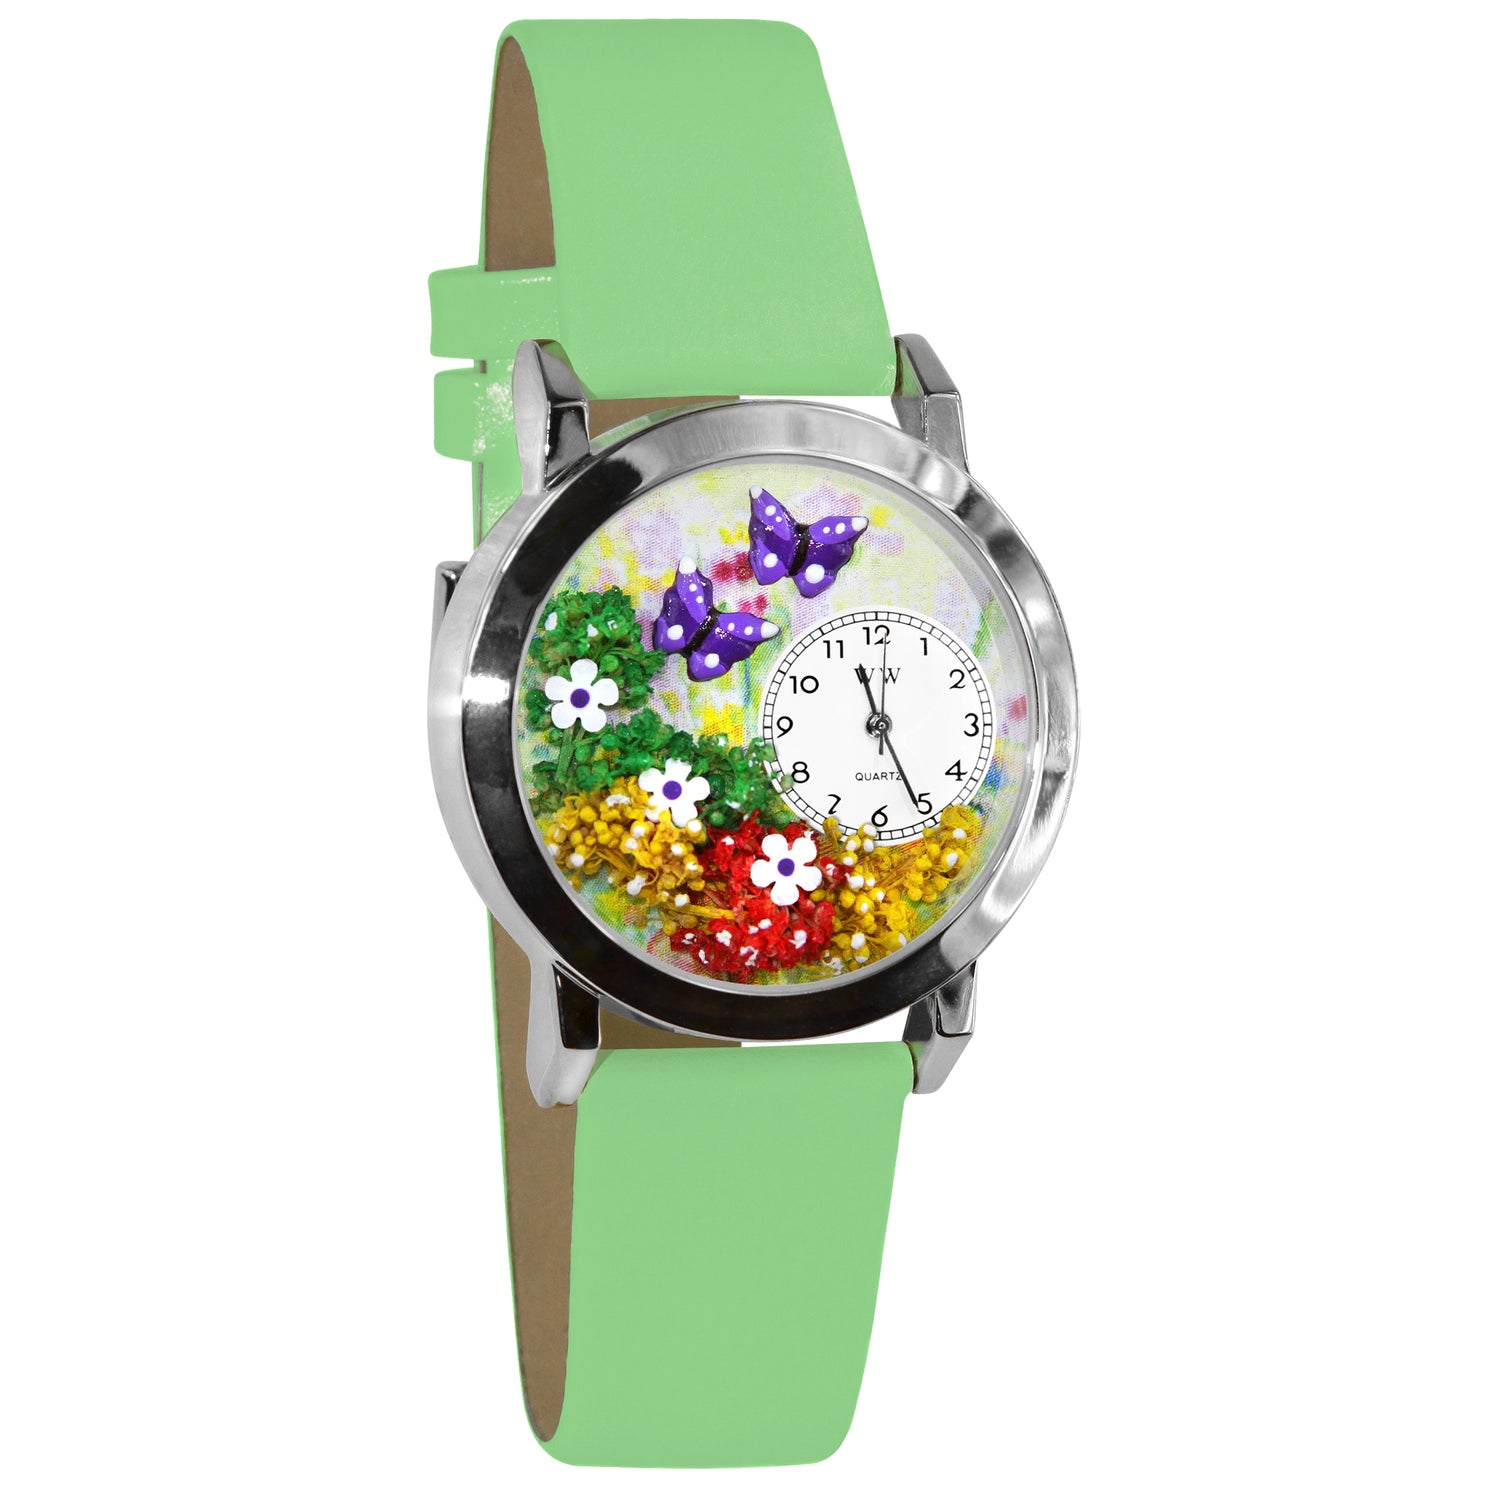 Whimsical Gifts | Butterflies 3D Watch Small Style | Handmade in USA | Animal Lover | Outdoor & Garden | Novelty Unique Fun Miniatures Gift | Silver Finish Green Leather Watch Band